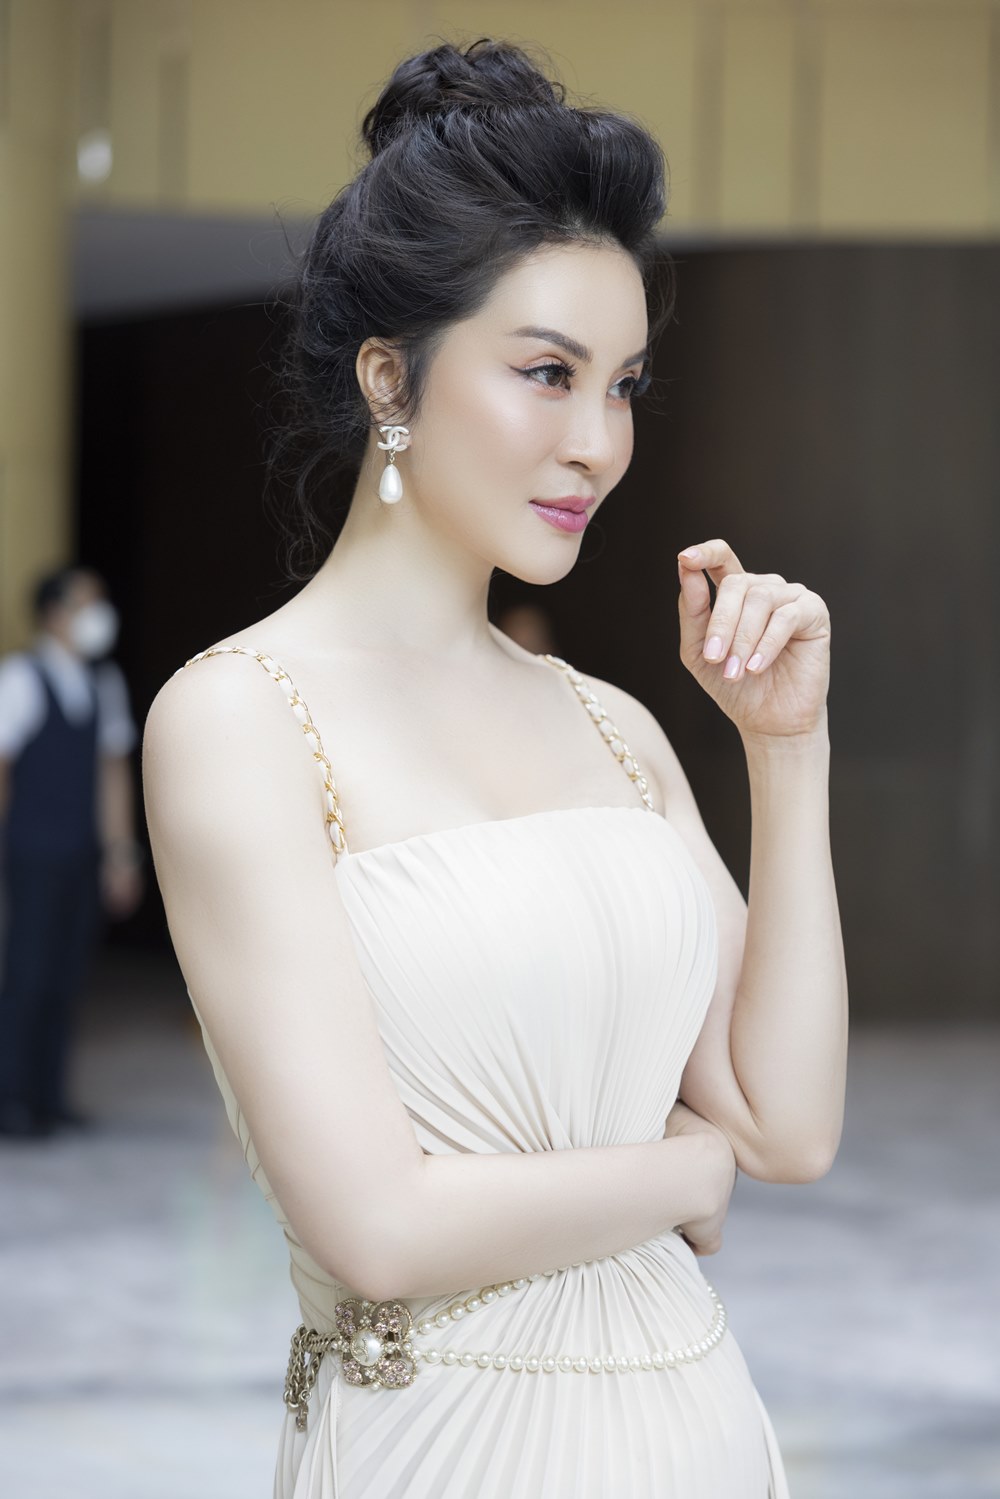 Thanh Mai wears a beautiful white dress in a talk about fashion - 5